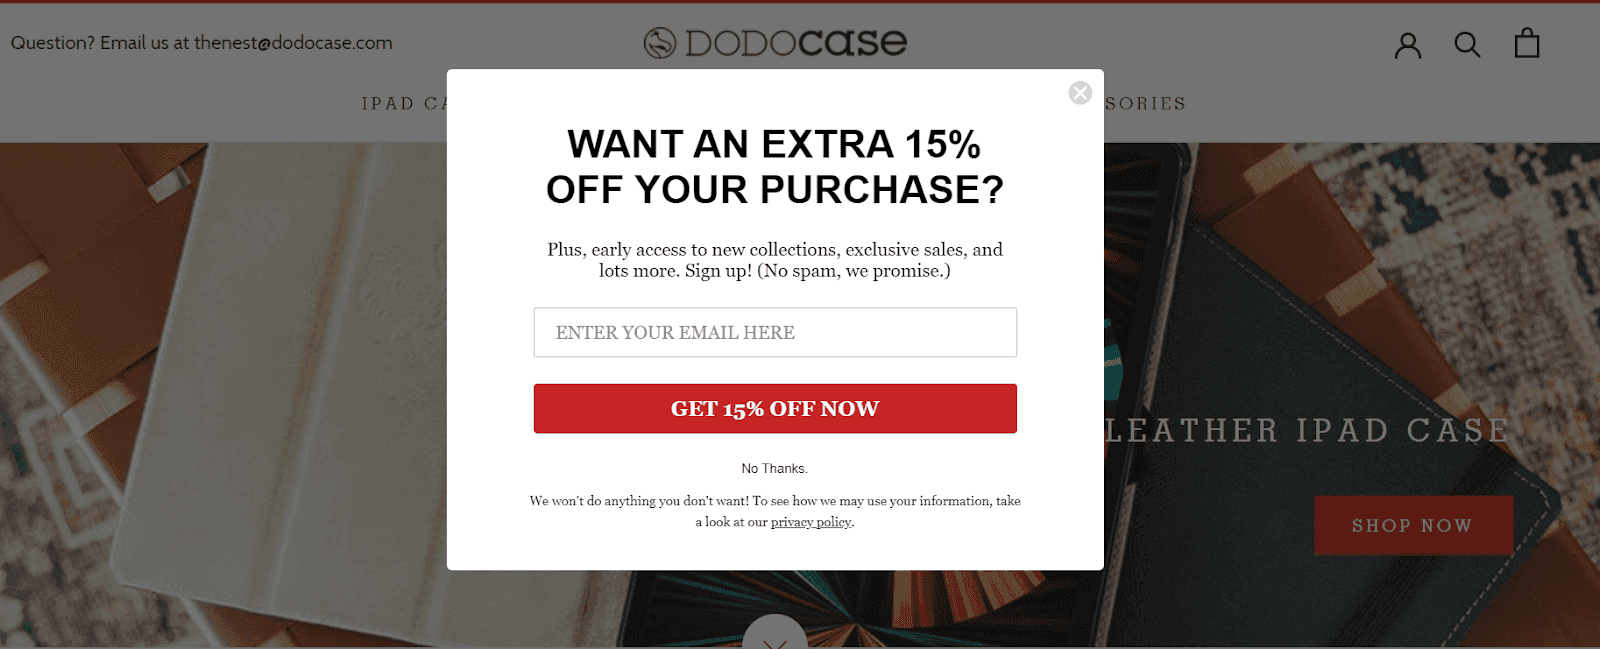 Discount strategy to drive sales from customers